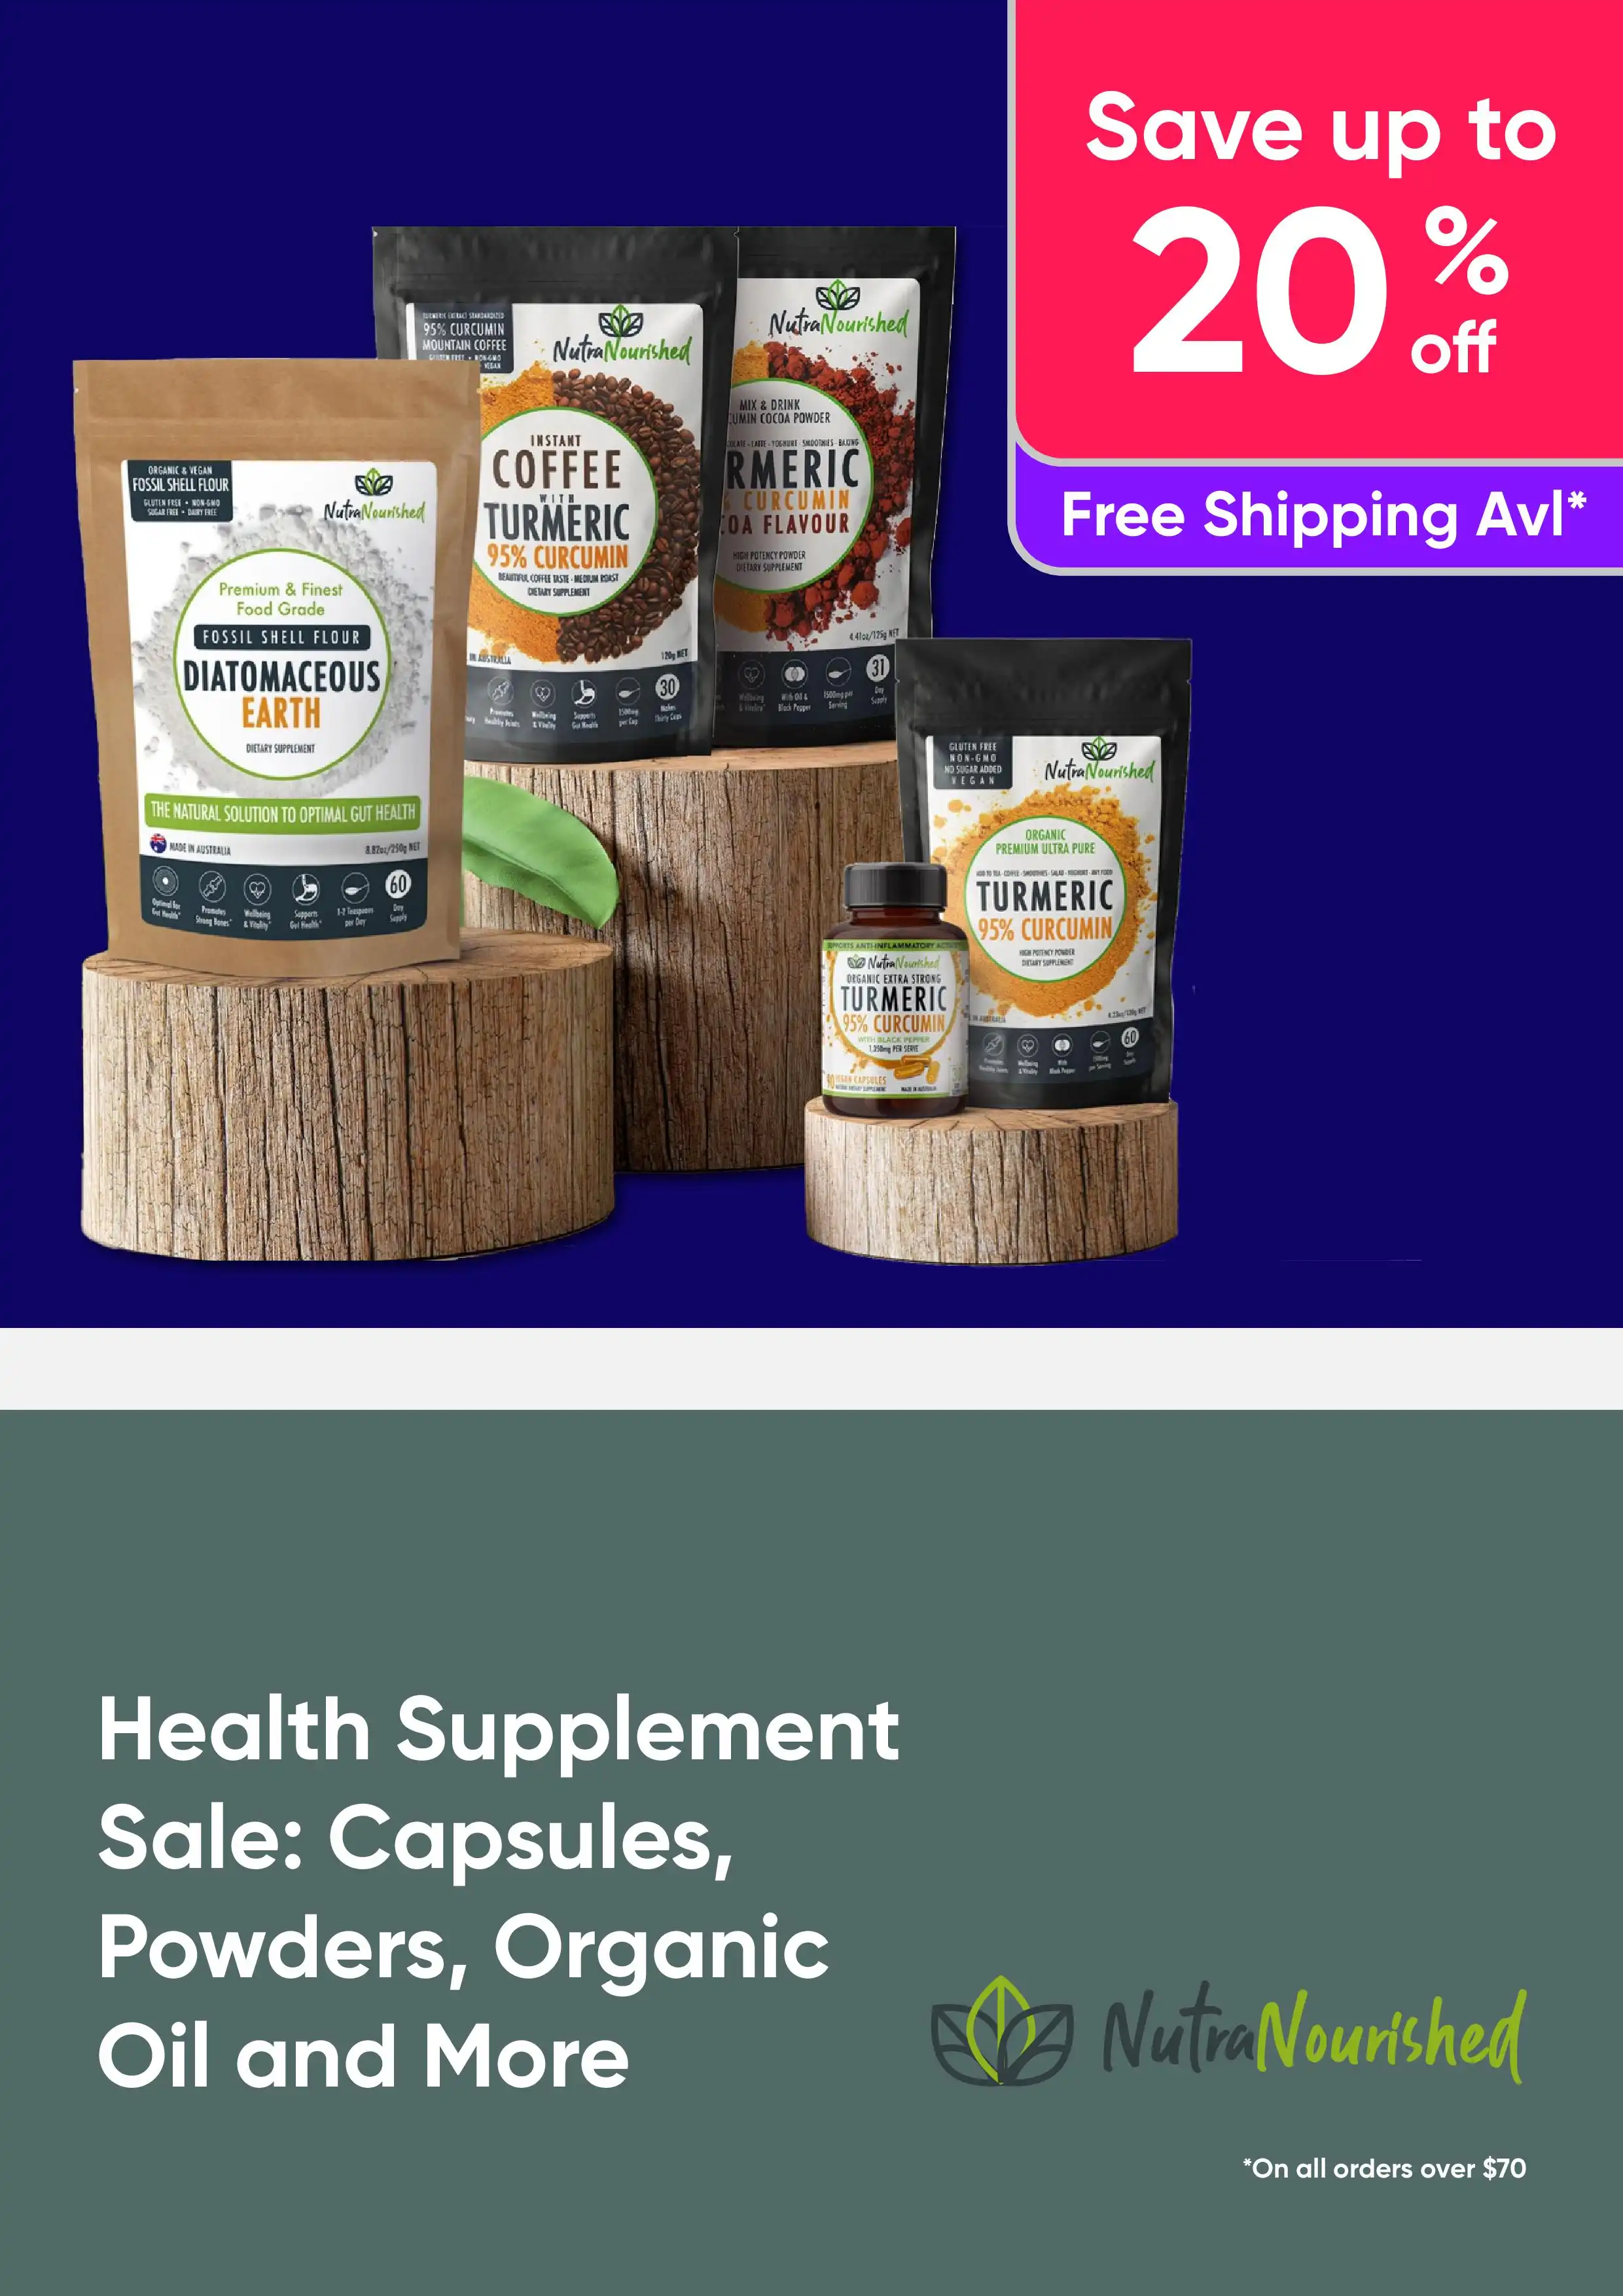 Health Supplement Sale - Capsules, Powders, Organic Oils and More - up to 20% off